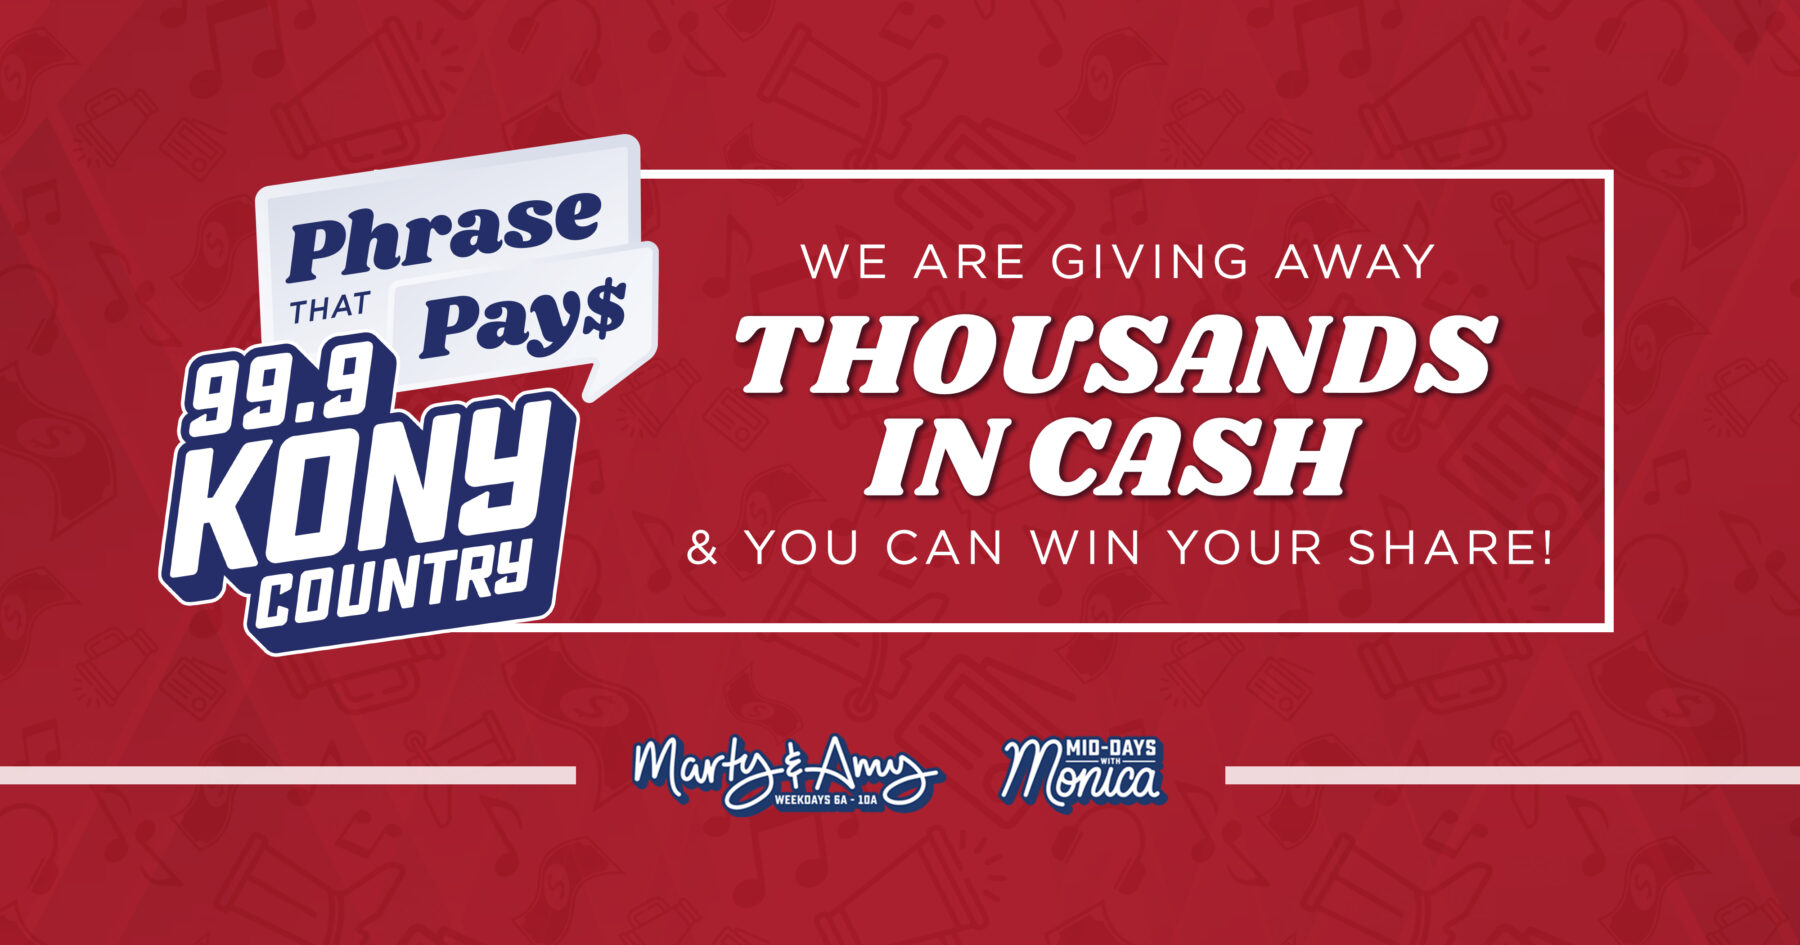 The Phrase that Pays: We are giving away THOUSANDS in cash & you can win your share!